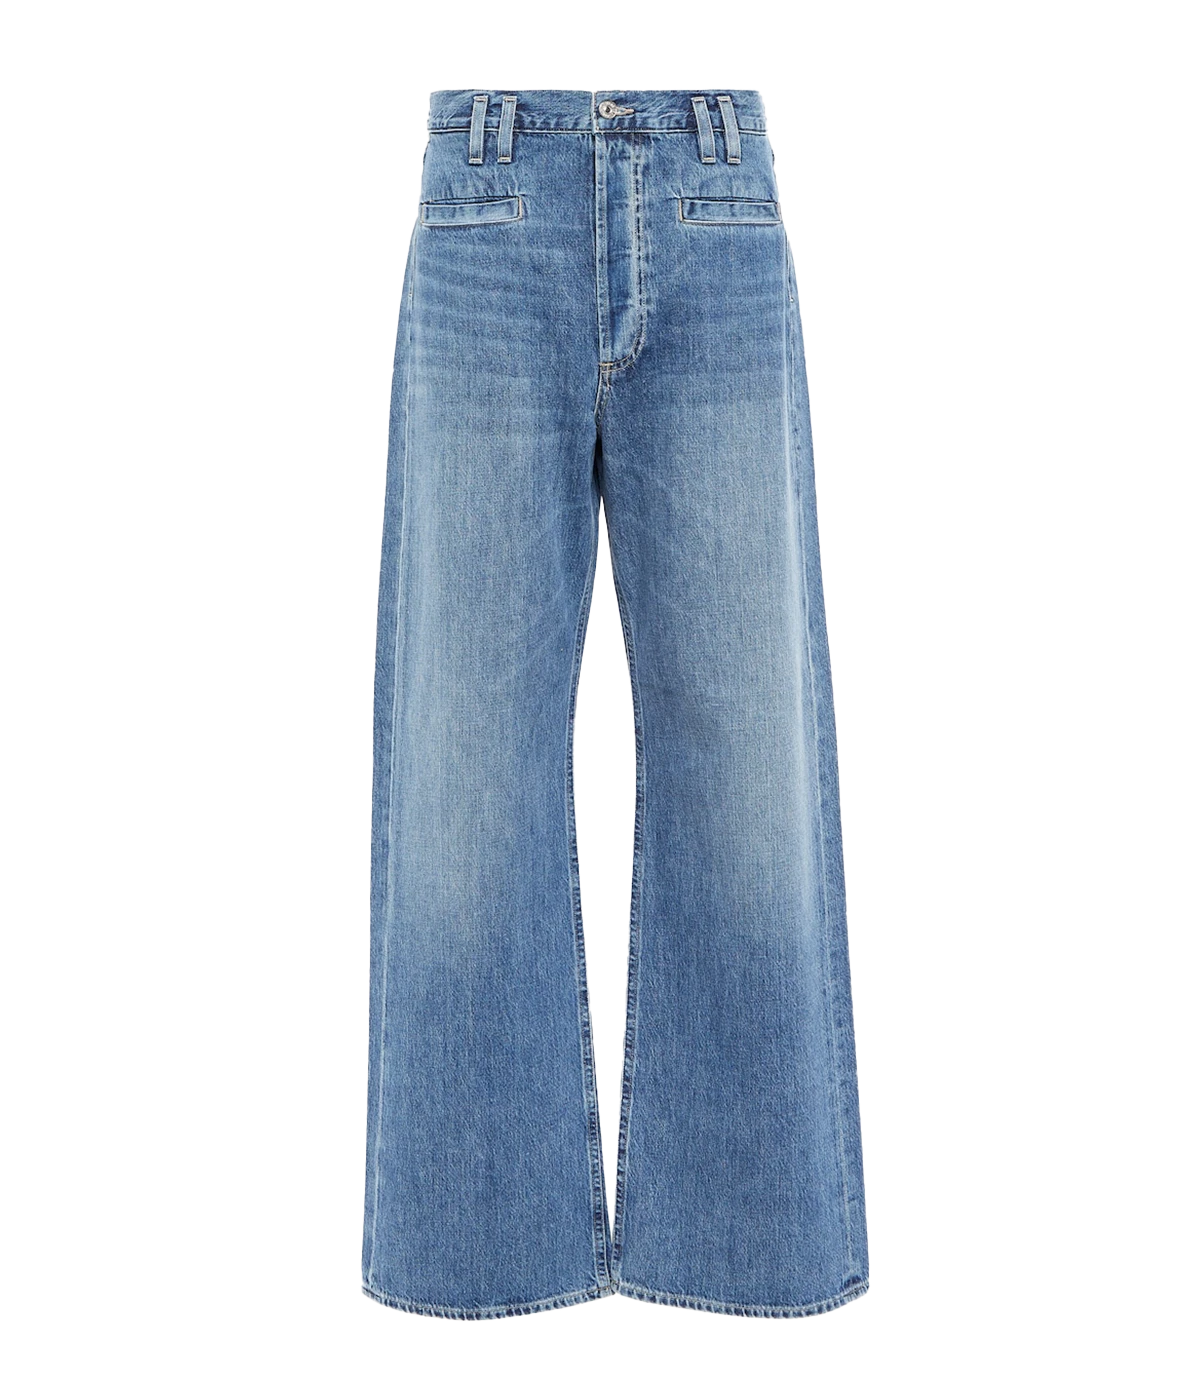 A medium blue wash elevated denim jean, with double  belt loop and front welt pocket detailing. Featuring a wide leg, clean hem, zip and button closure and 5 pockets. Elevated Jean, Everyday Jean, Vintage inspired jean, made in USA, comfortable, organic. 